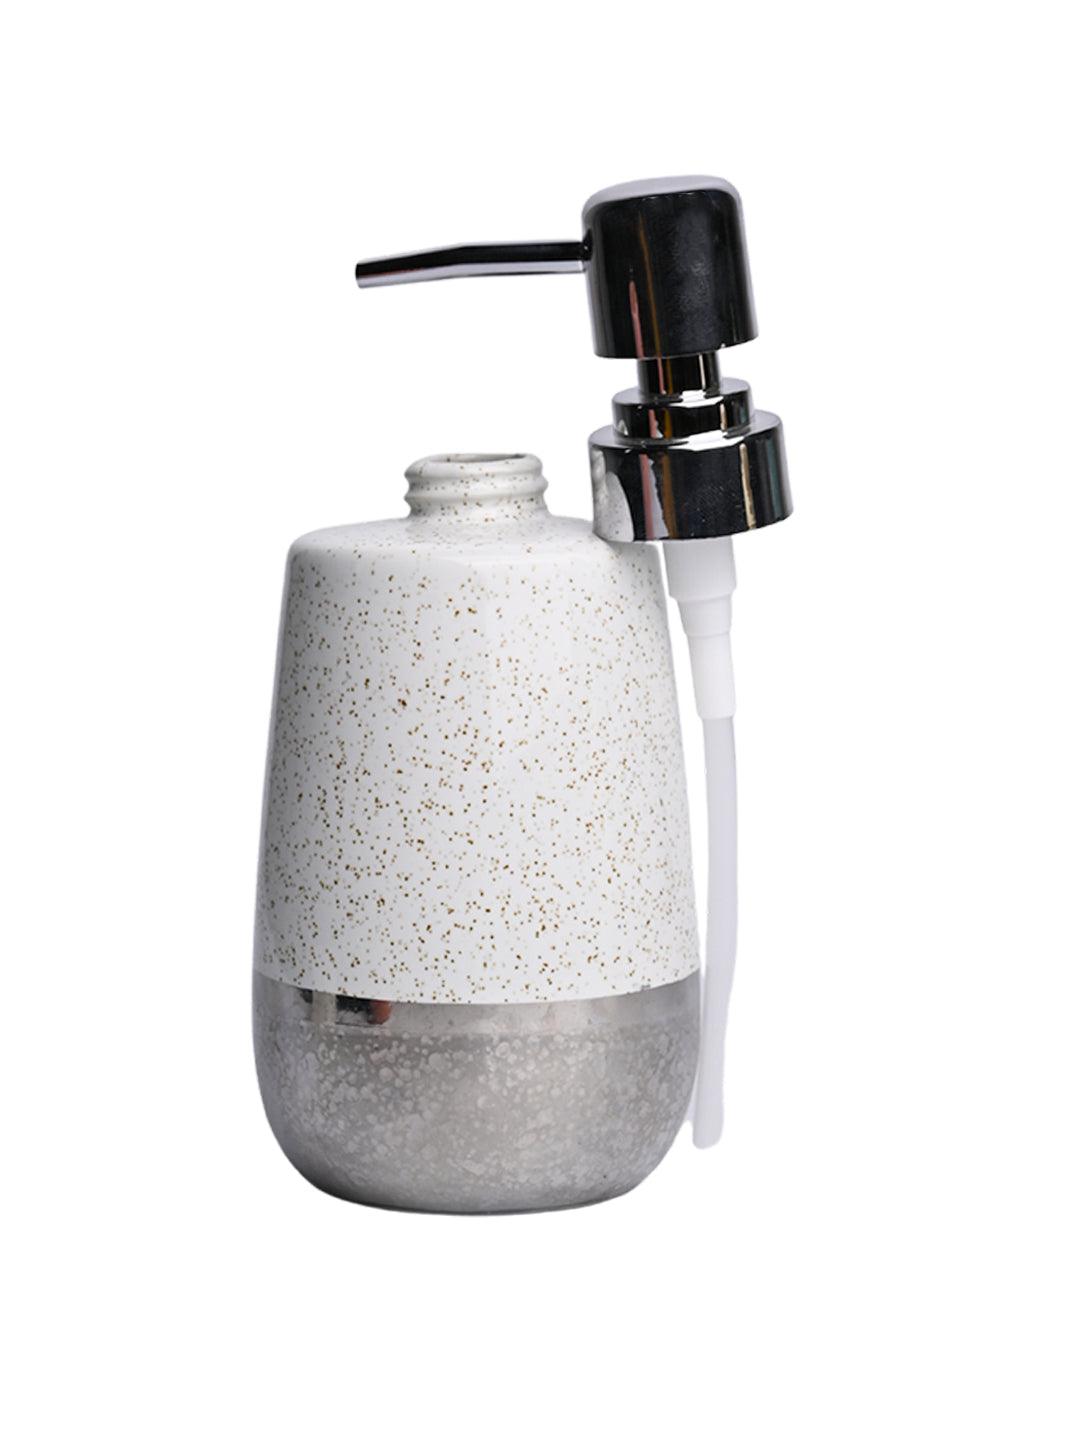 Dotted Style Soap Dispenser - MARKET99